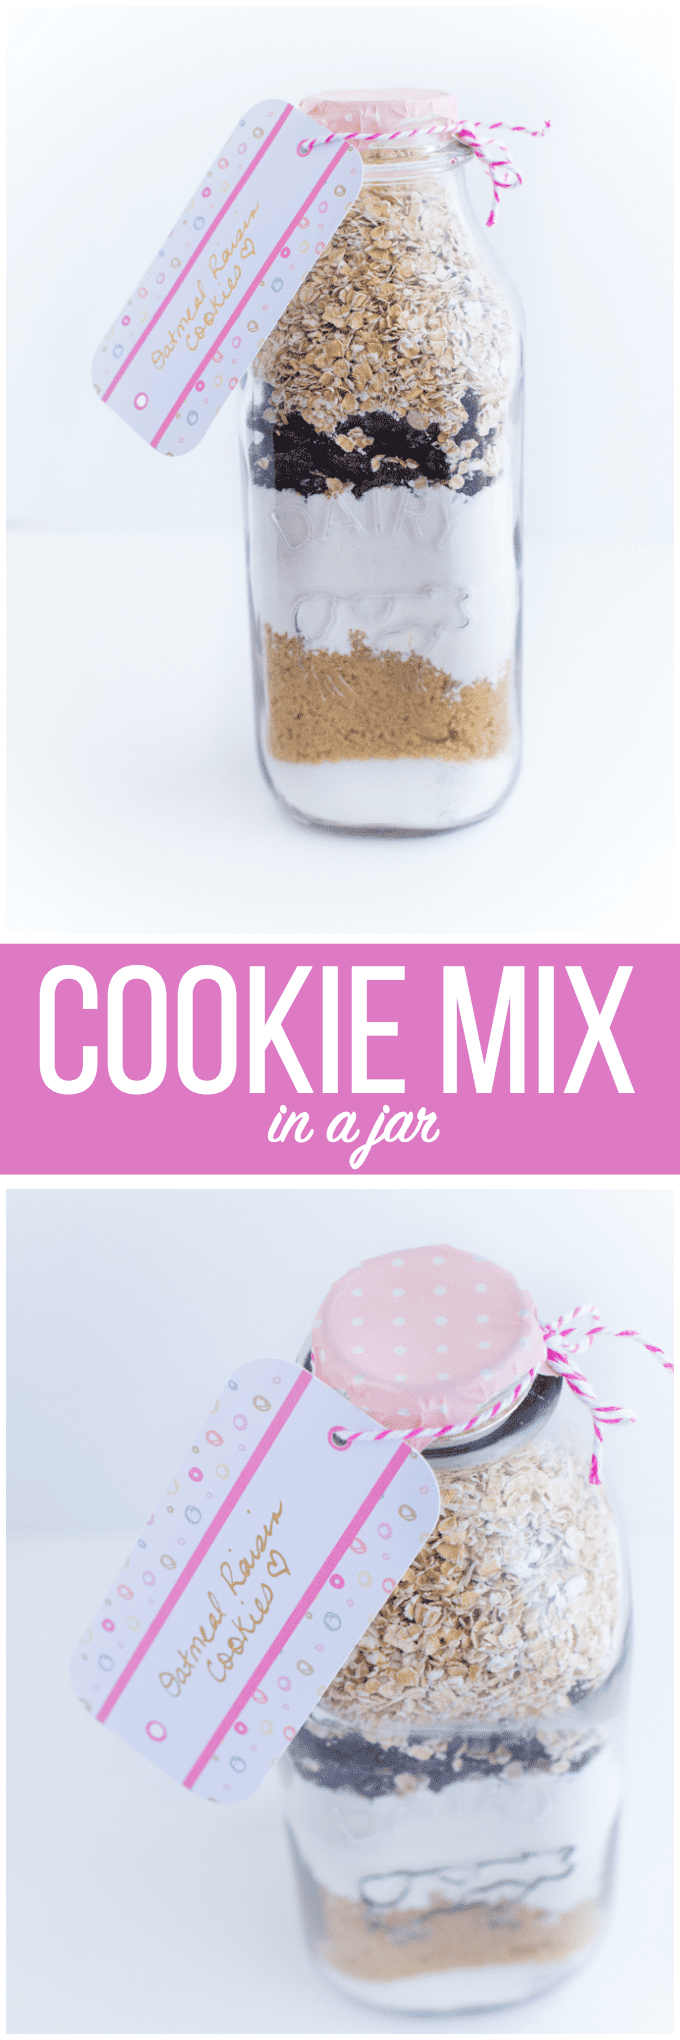 Cookie Mix in a Jar - Layered cookie ingredients makes for a beautiful gift and yummy dessert. Love this gift idea for Mother's Day!